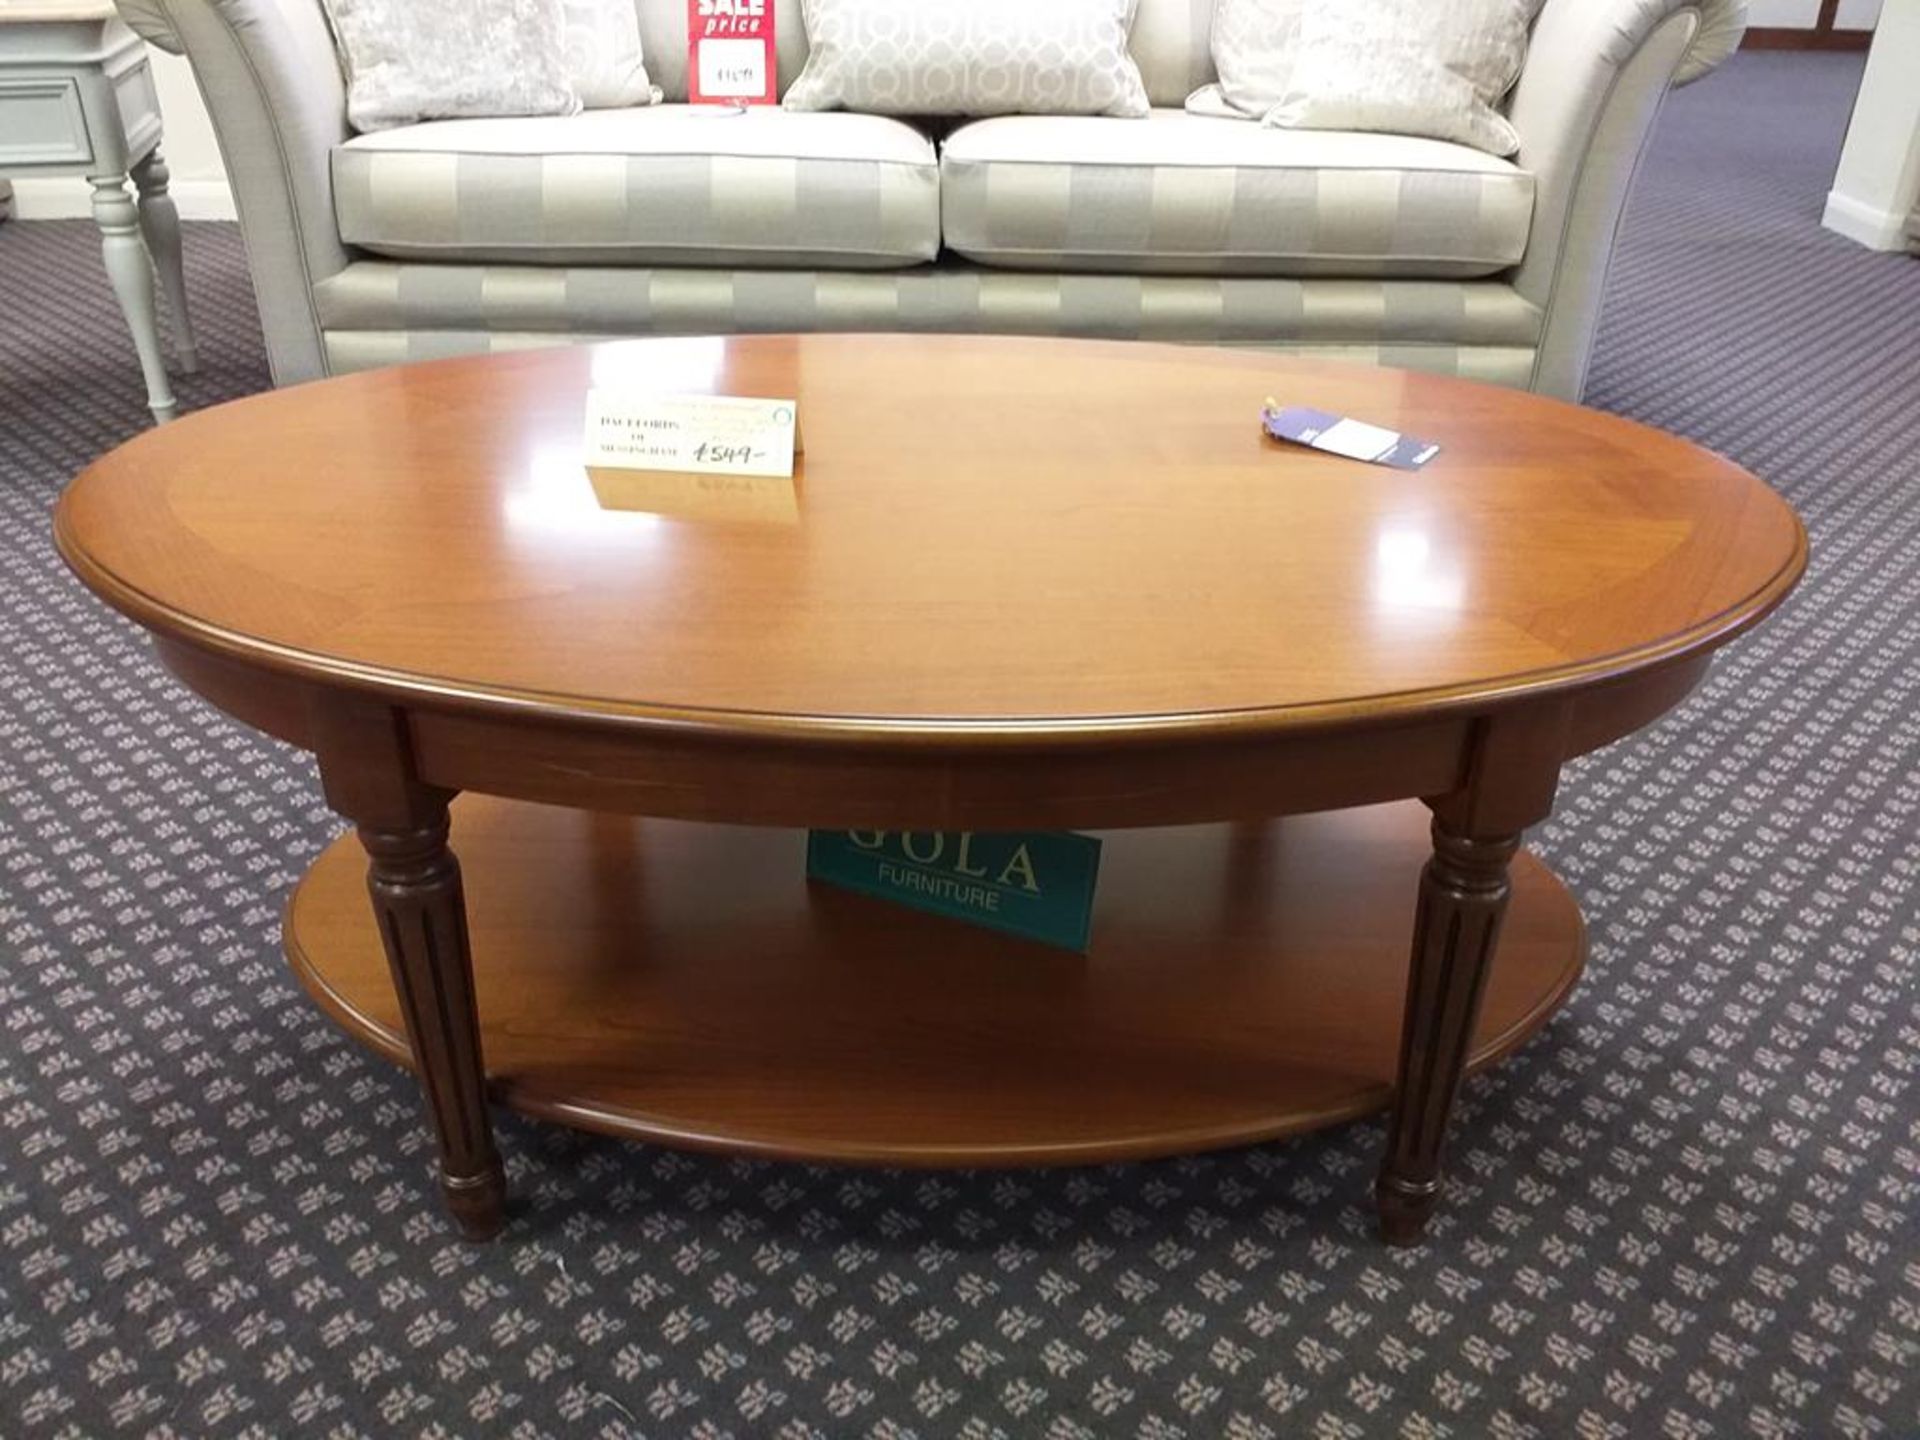 Gola Avoca large oval coffee table w/under tier